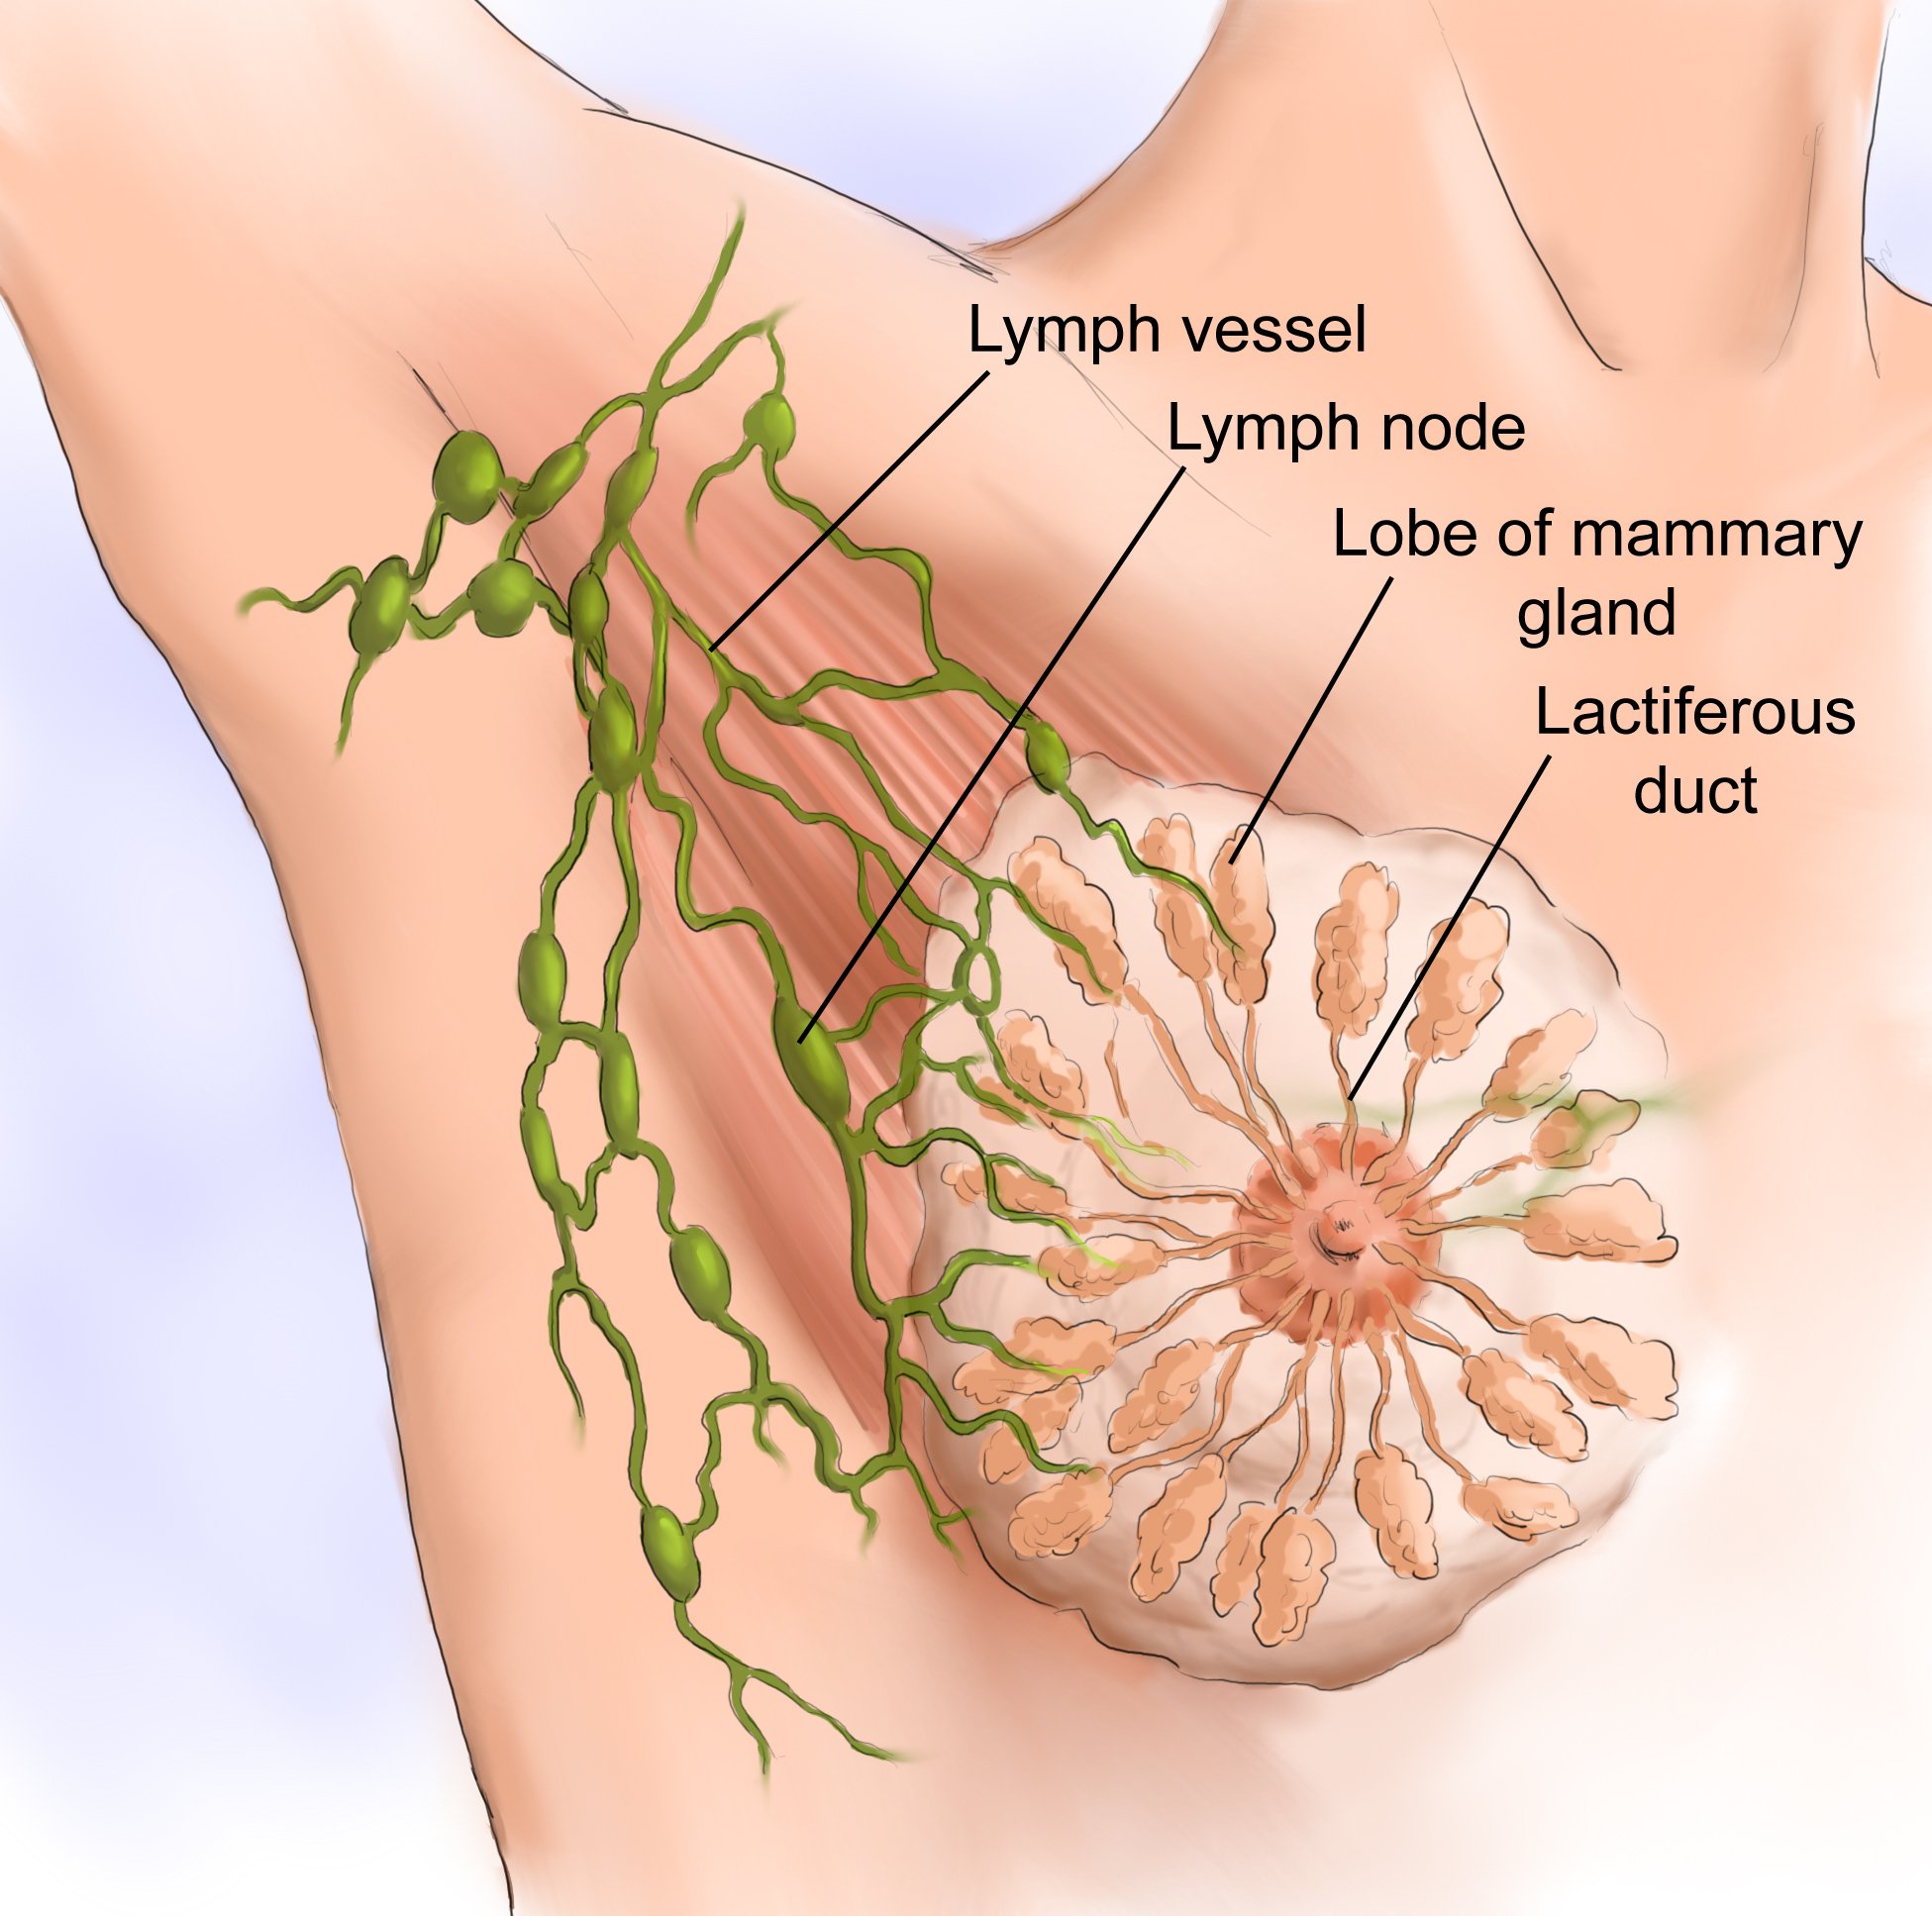 Wound Healing After Breast Cancer Surgery Triggers ...